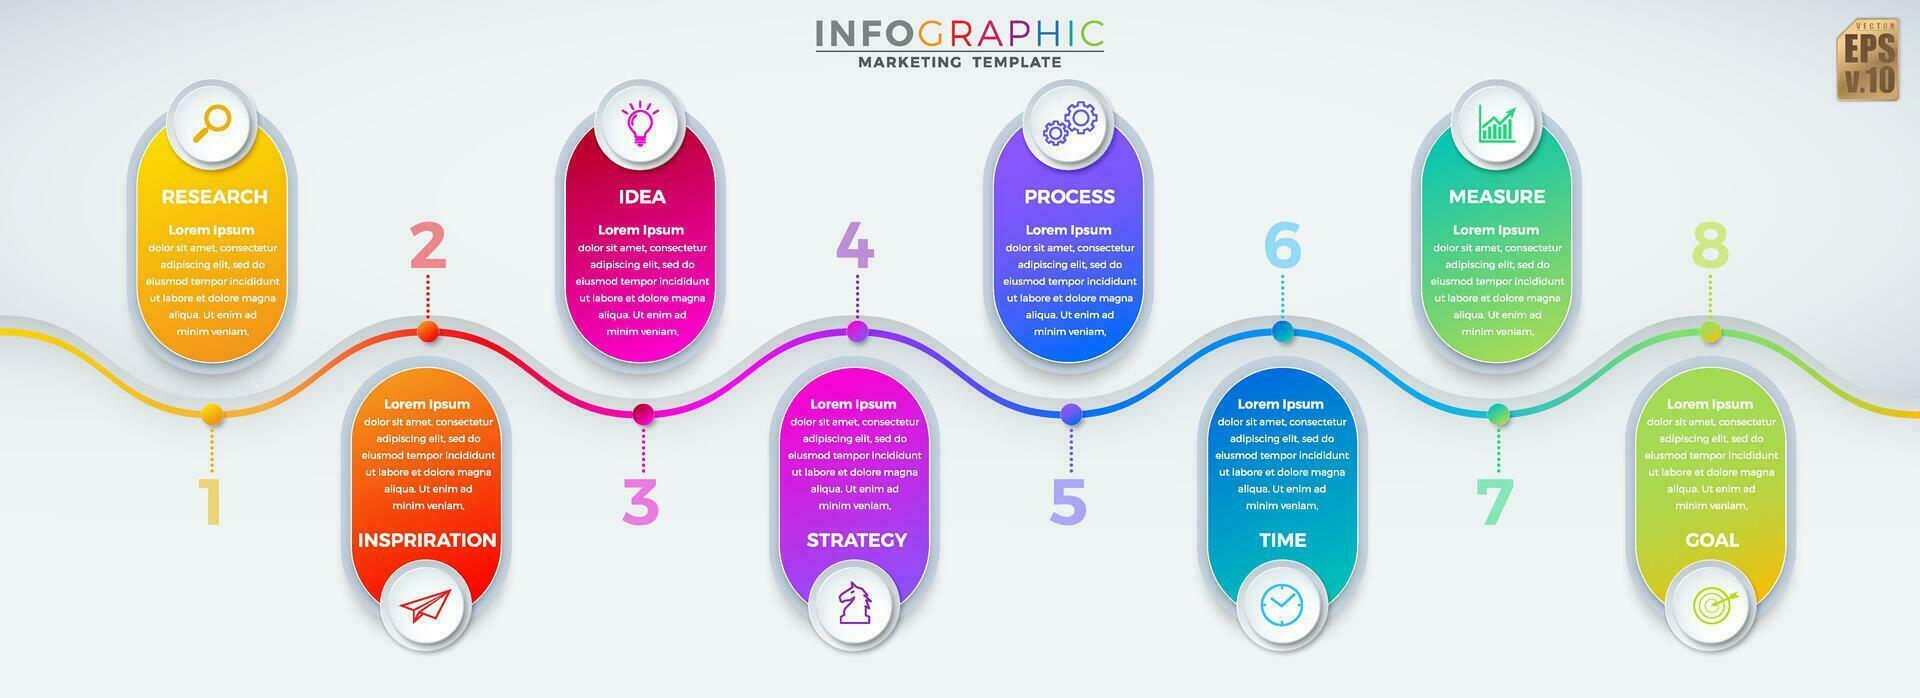 Infographic vector business marketing template colorful design circle icons 8 options isolated in minimal style. You can used for Marketing process, workflow presentations layout, flow chart, print ad